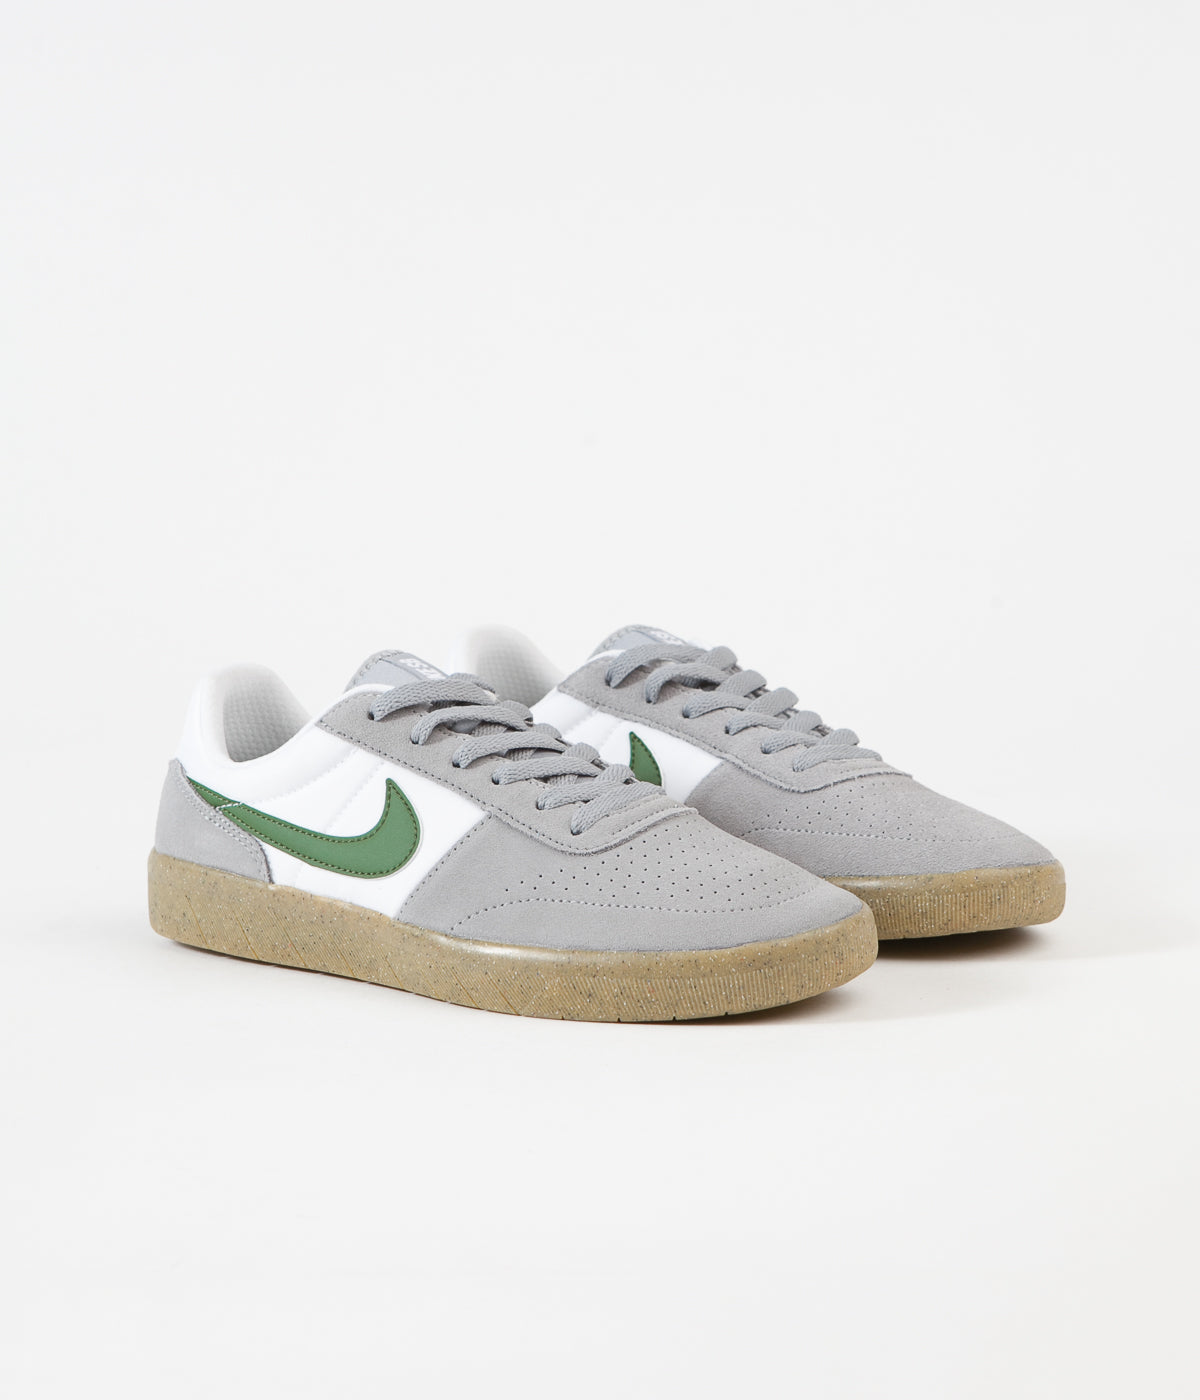 Nike SB Team Classic Shoes Particle Grey / Forest Green - Particle | Flatspot